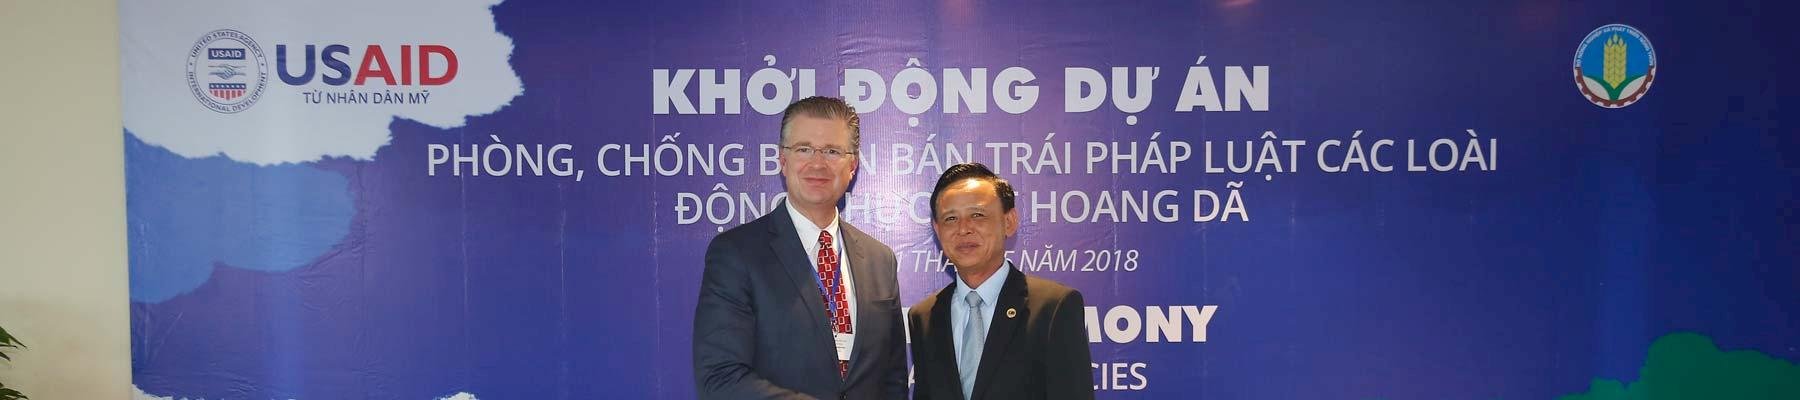 US Ambassador Daniel J. Kritenbrink and Permanent Deputy Minister of MARD Dr. Ha Cong Tuan at the launch of the USAID Saving Species project